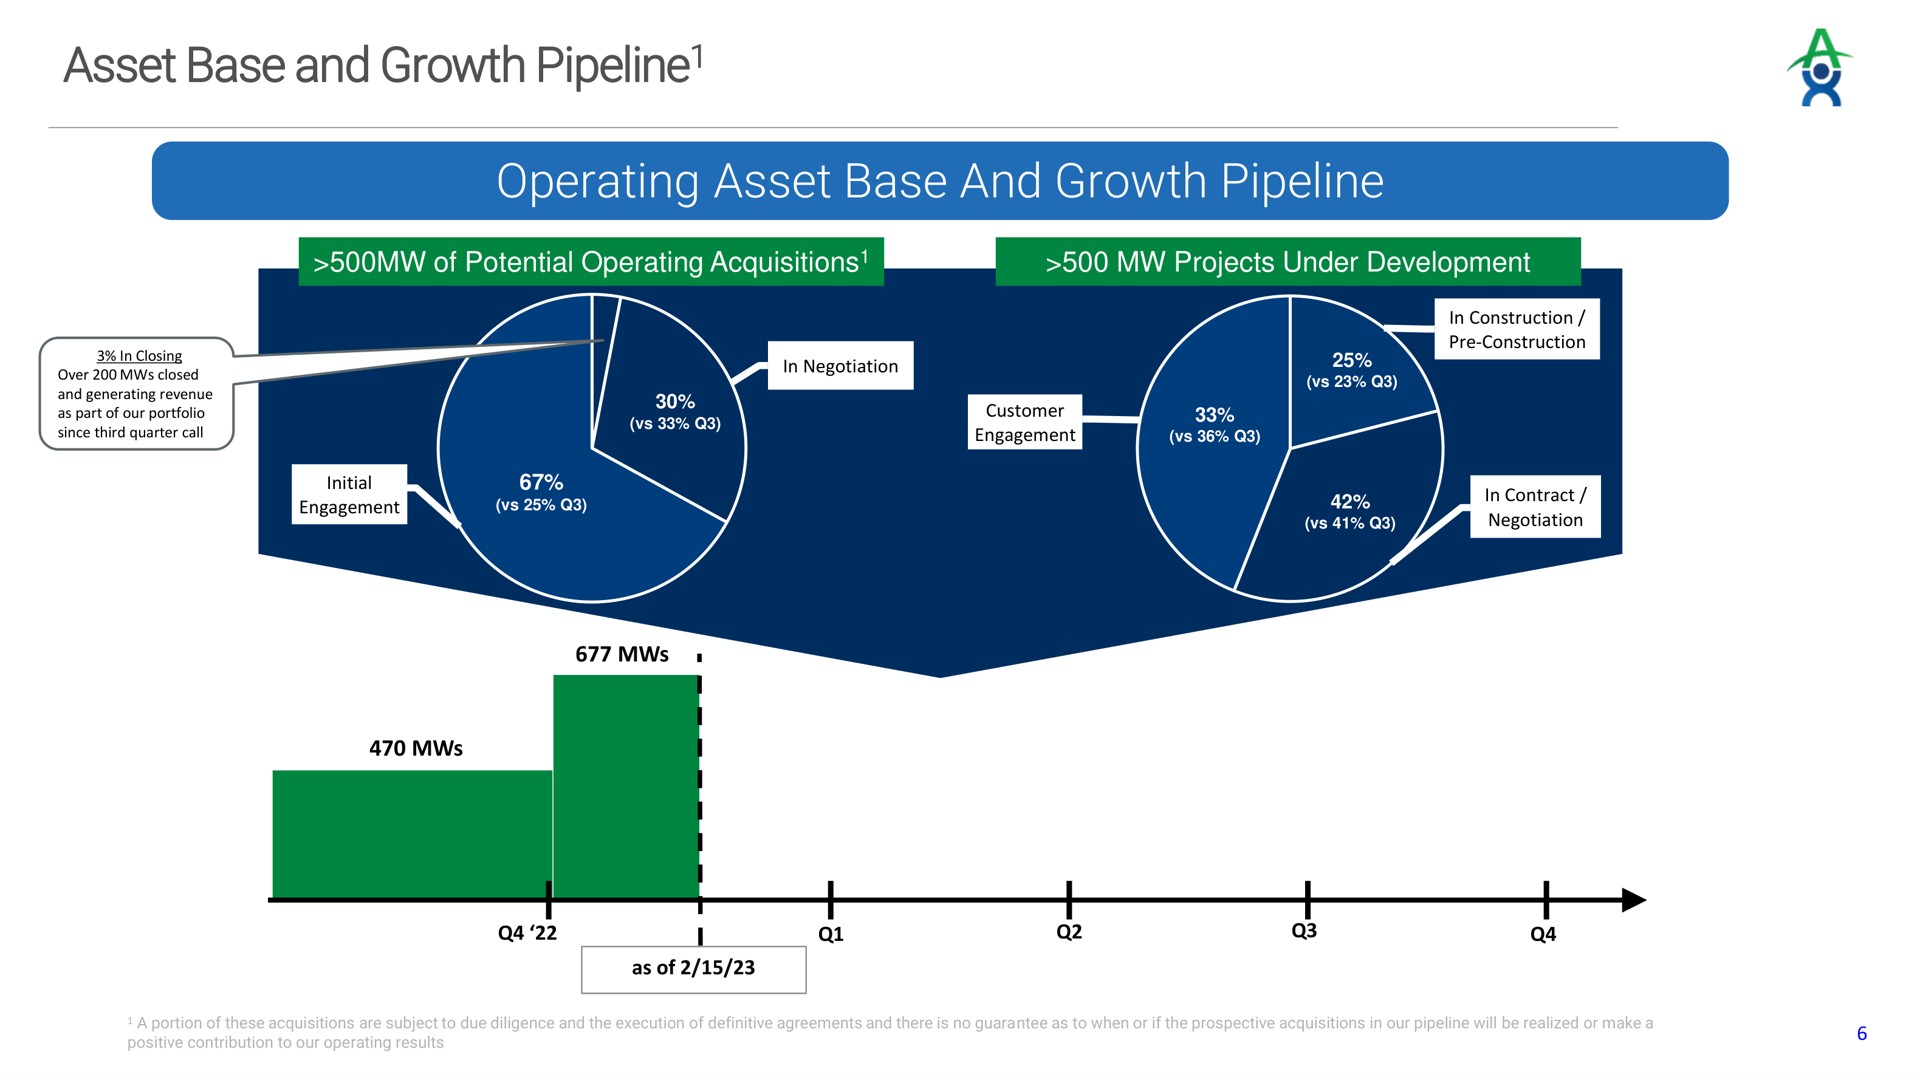 asset base and growth pipeline operating asset base and growth pipeline over watt of actionable pipeline | Altus Power